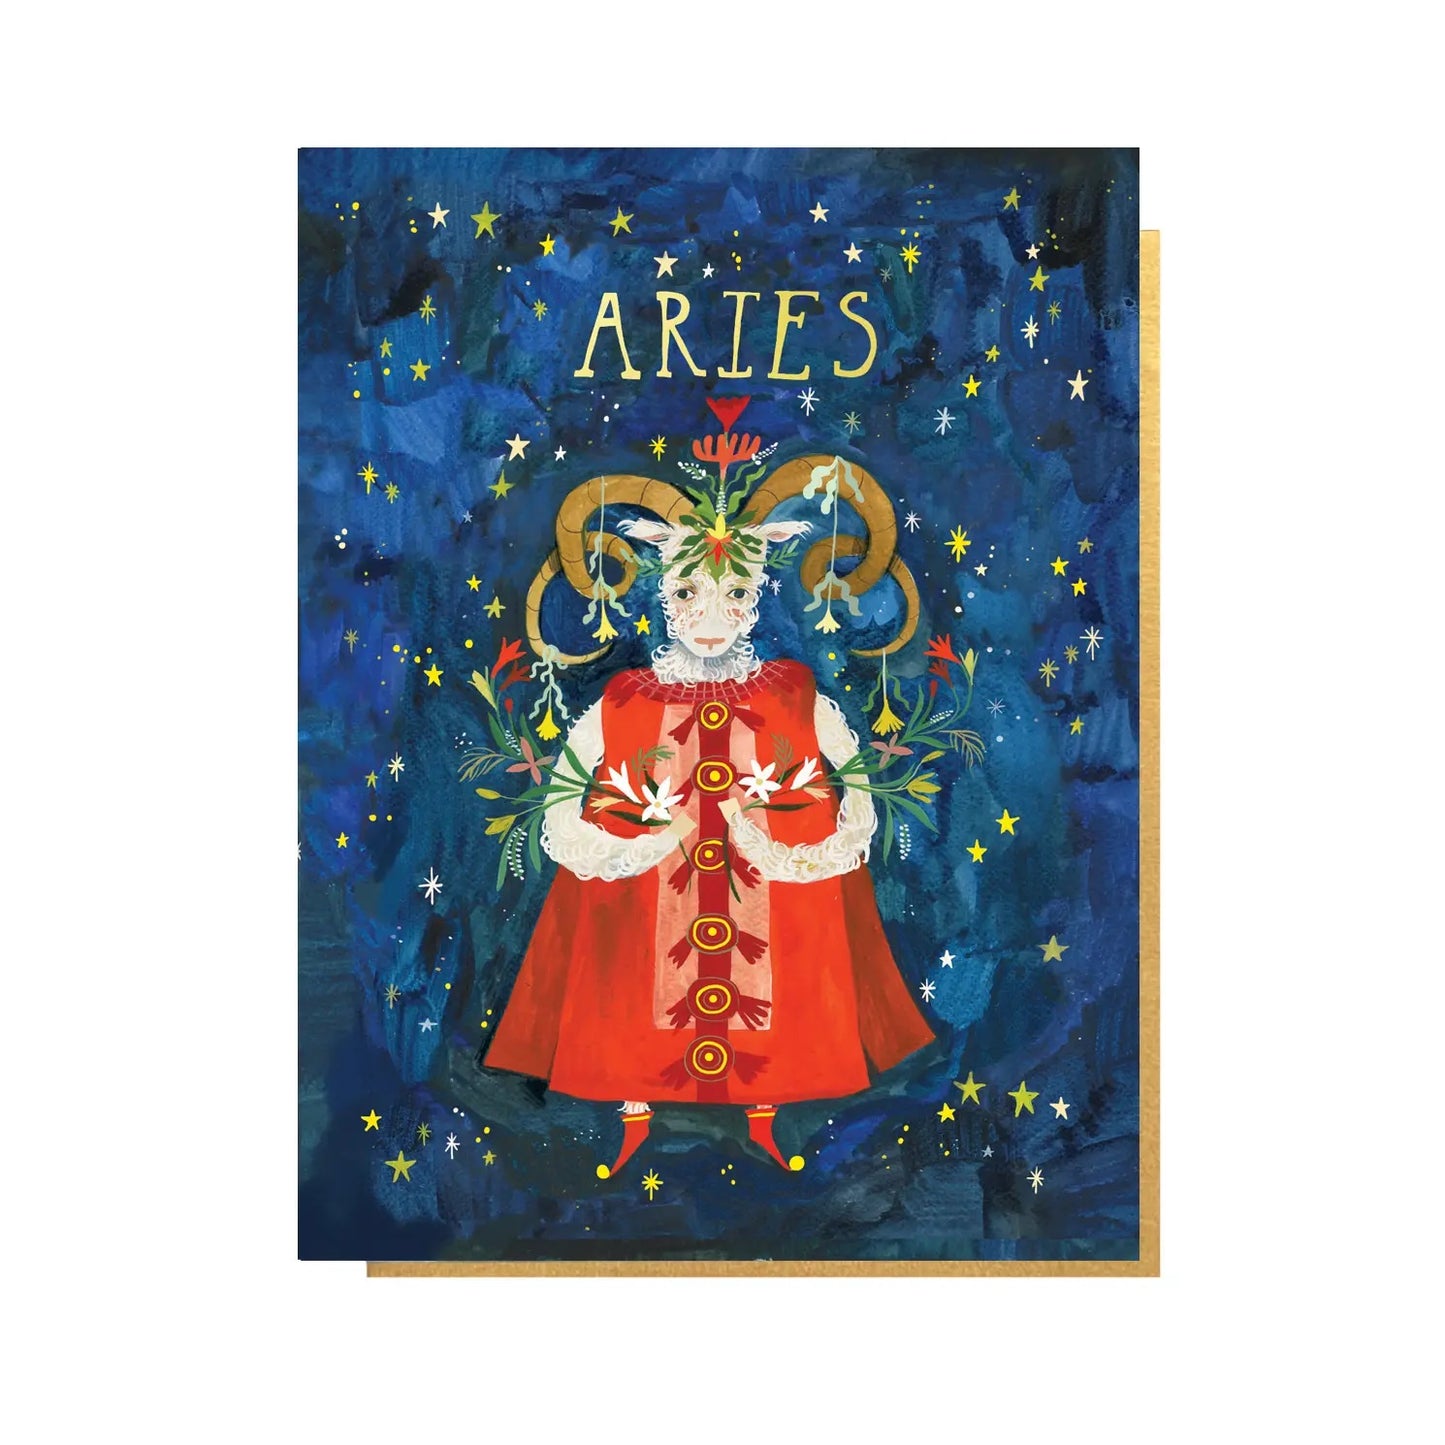 Folding card with illustration of a ram, flowers and starry sky Aries written above